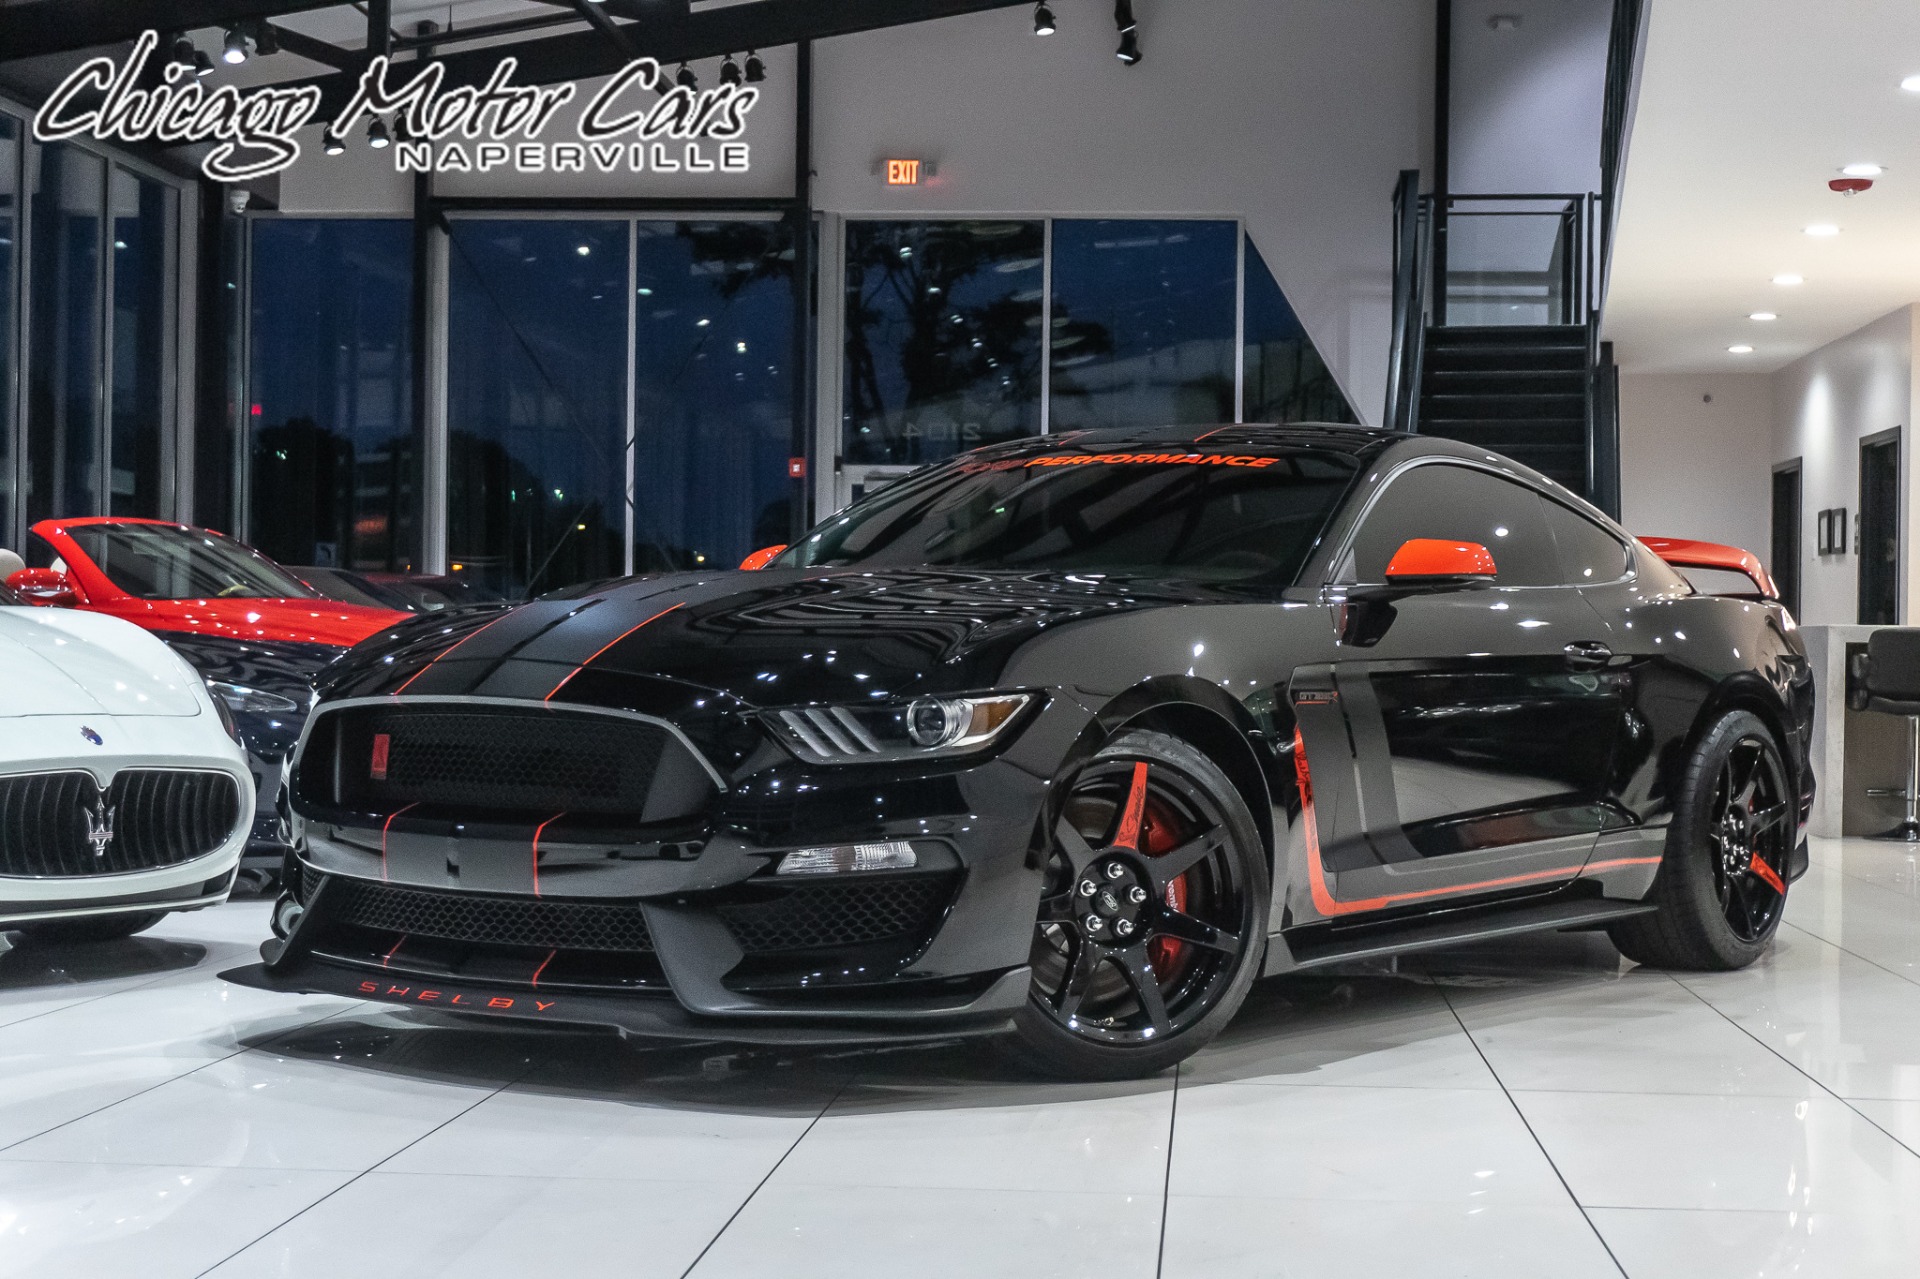 Used-2020-Ford-Mustang-Shelby-GT350R-6-SPEED-Only-1280-Miles-Tech-Pack-Cosmetic-Upgrades